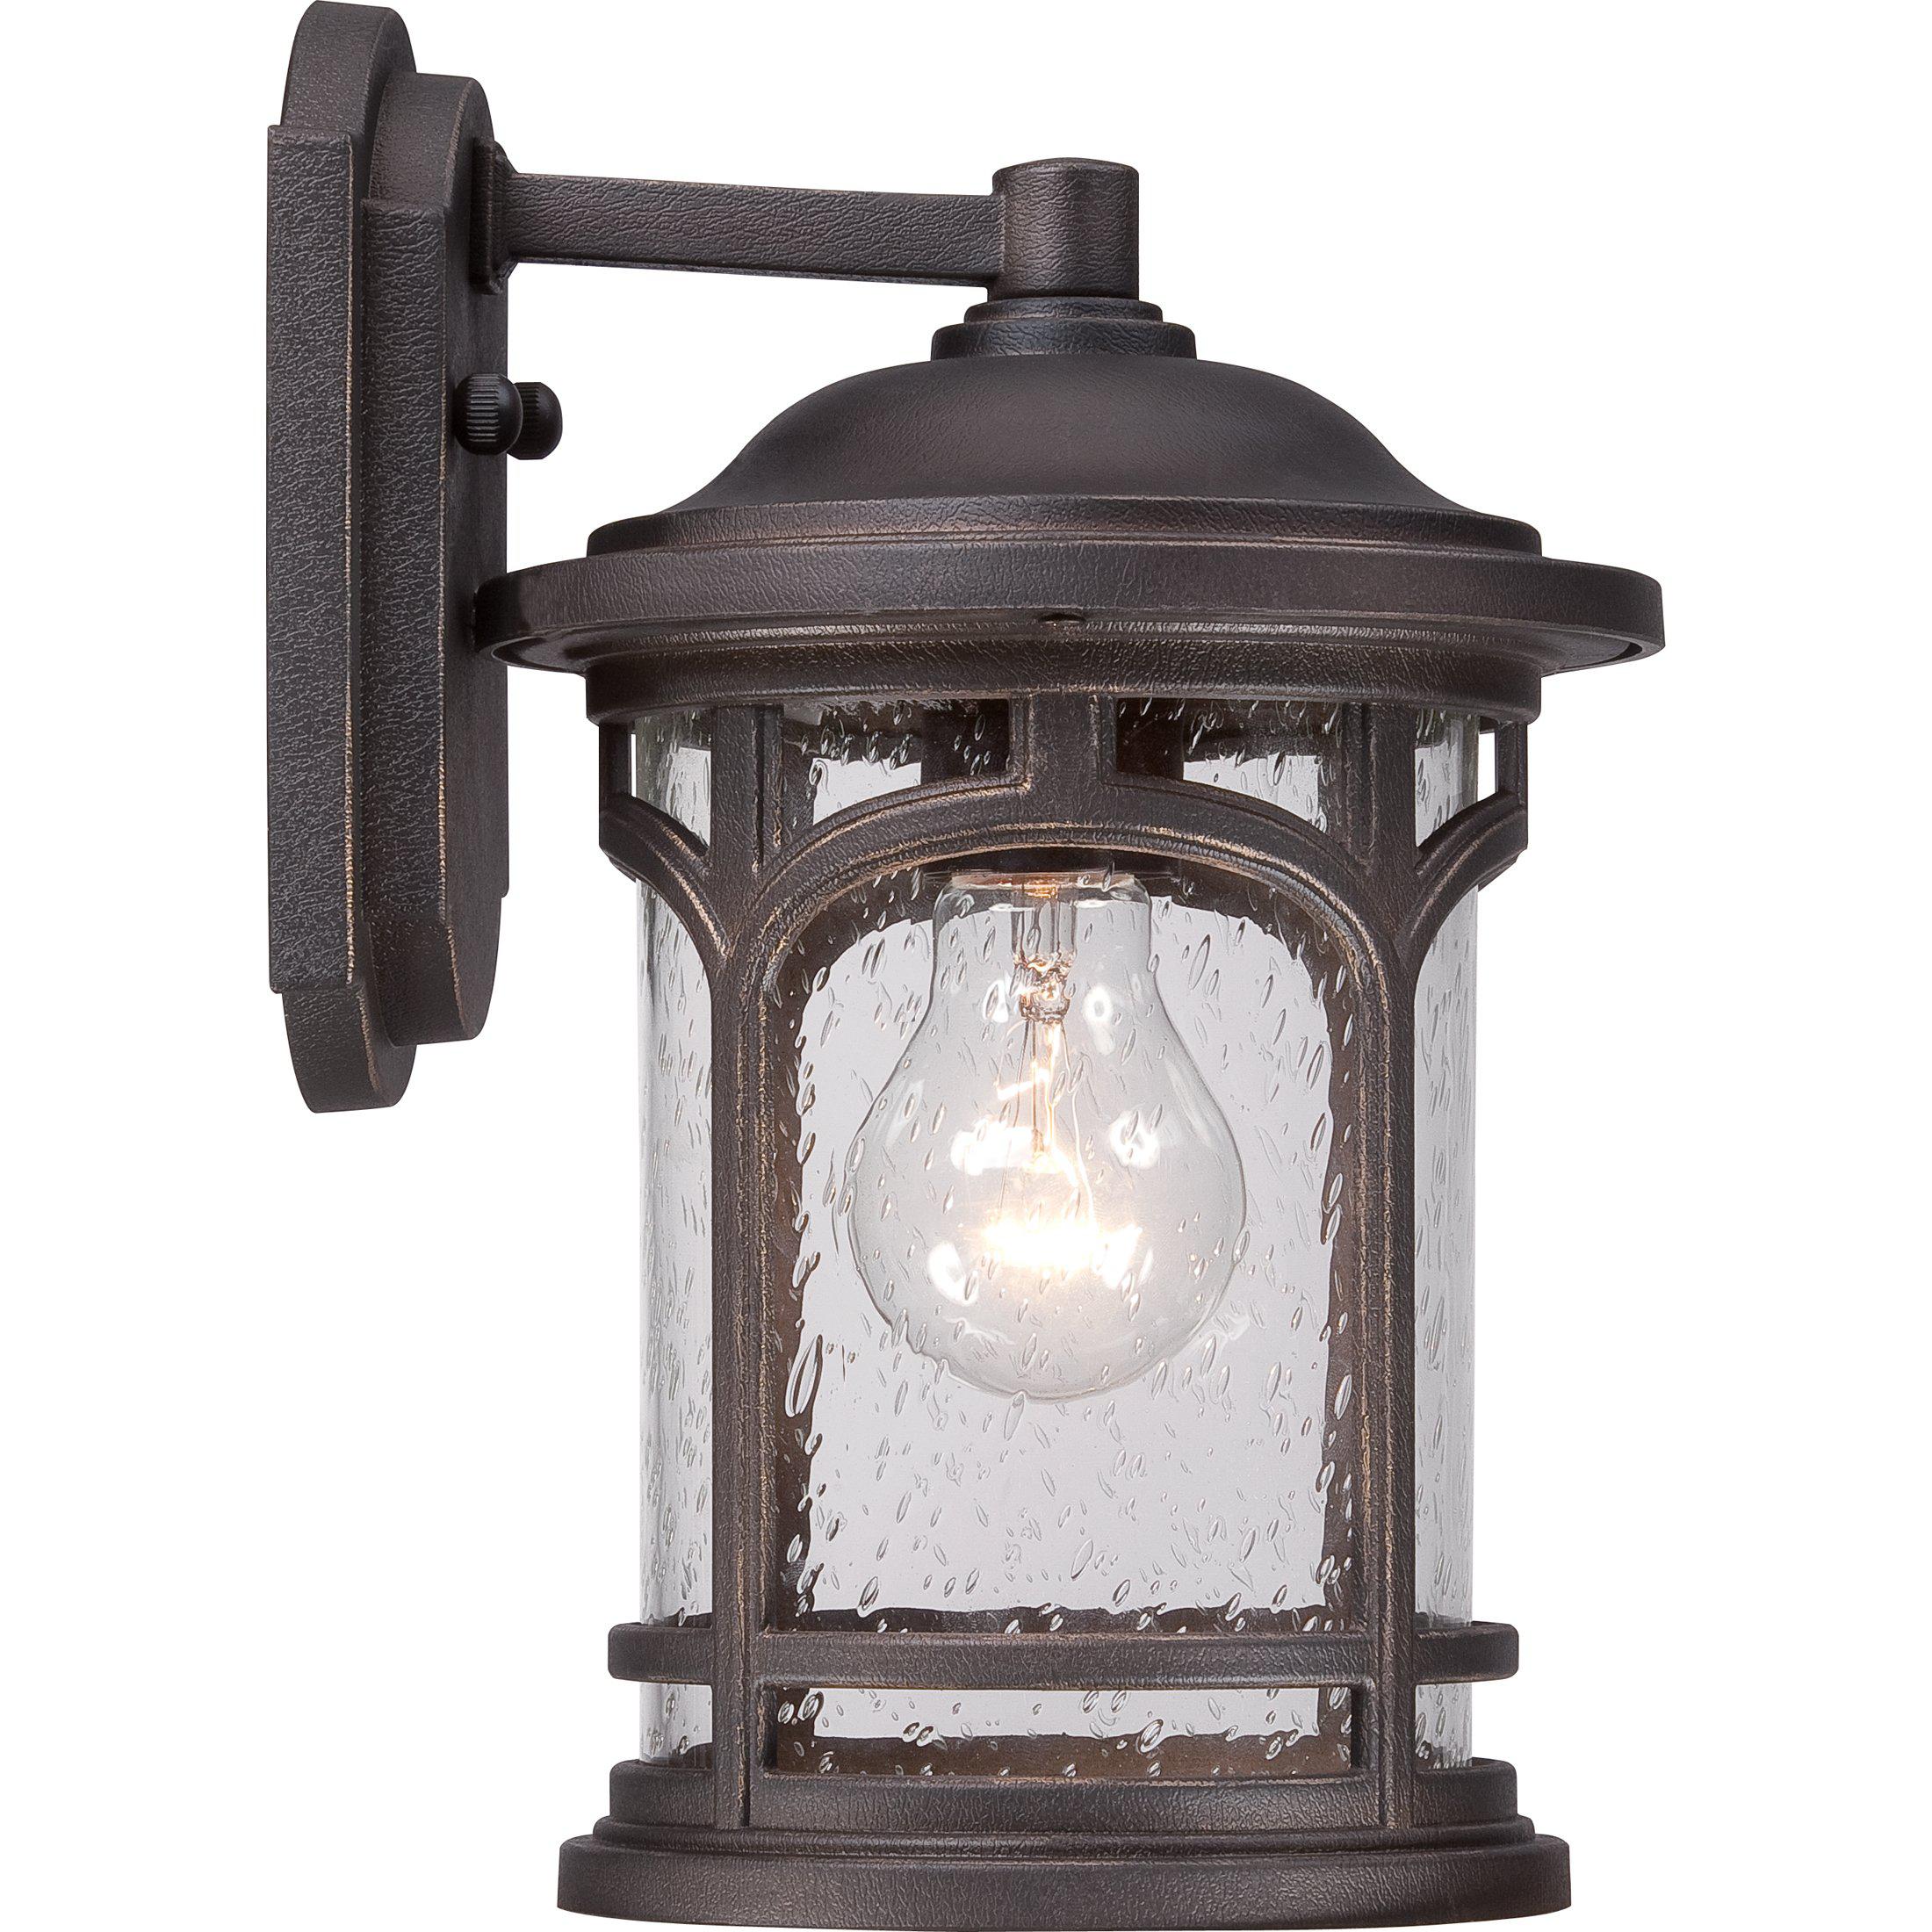 Quoizel Marblehead Outdoor Lantern, Small